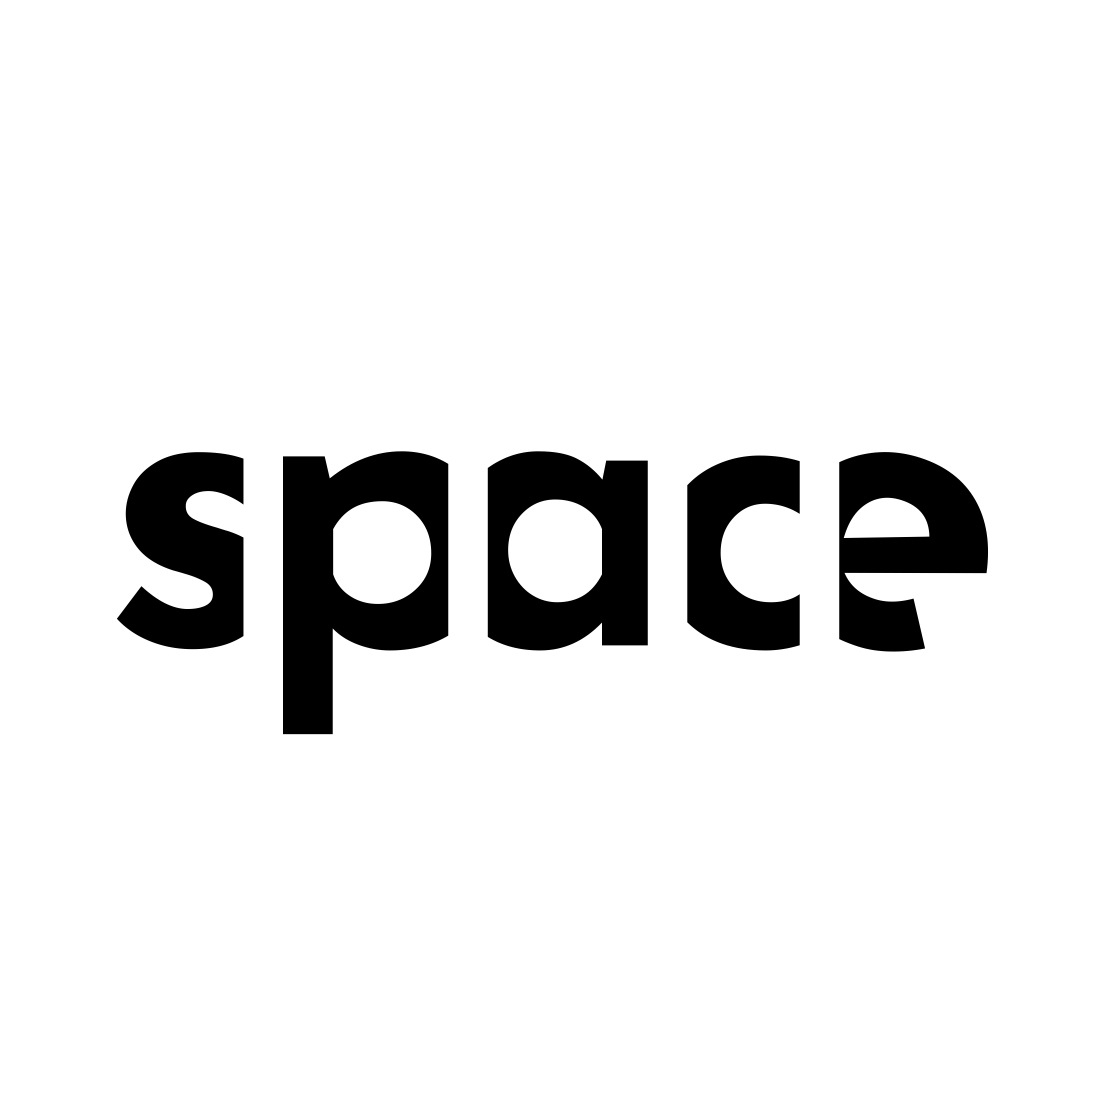 Space Logo logo design by logo designer Karl McCarthy Design for your inspiration and for the worlds largest logo competition